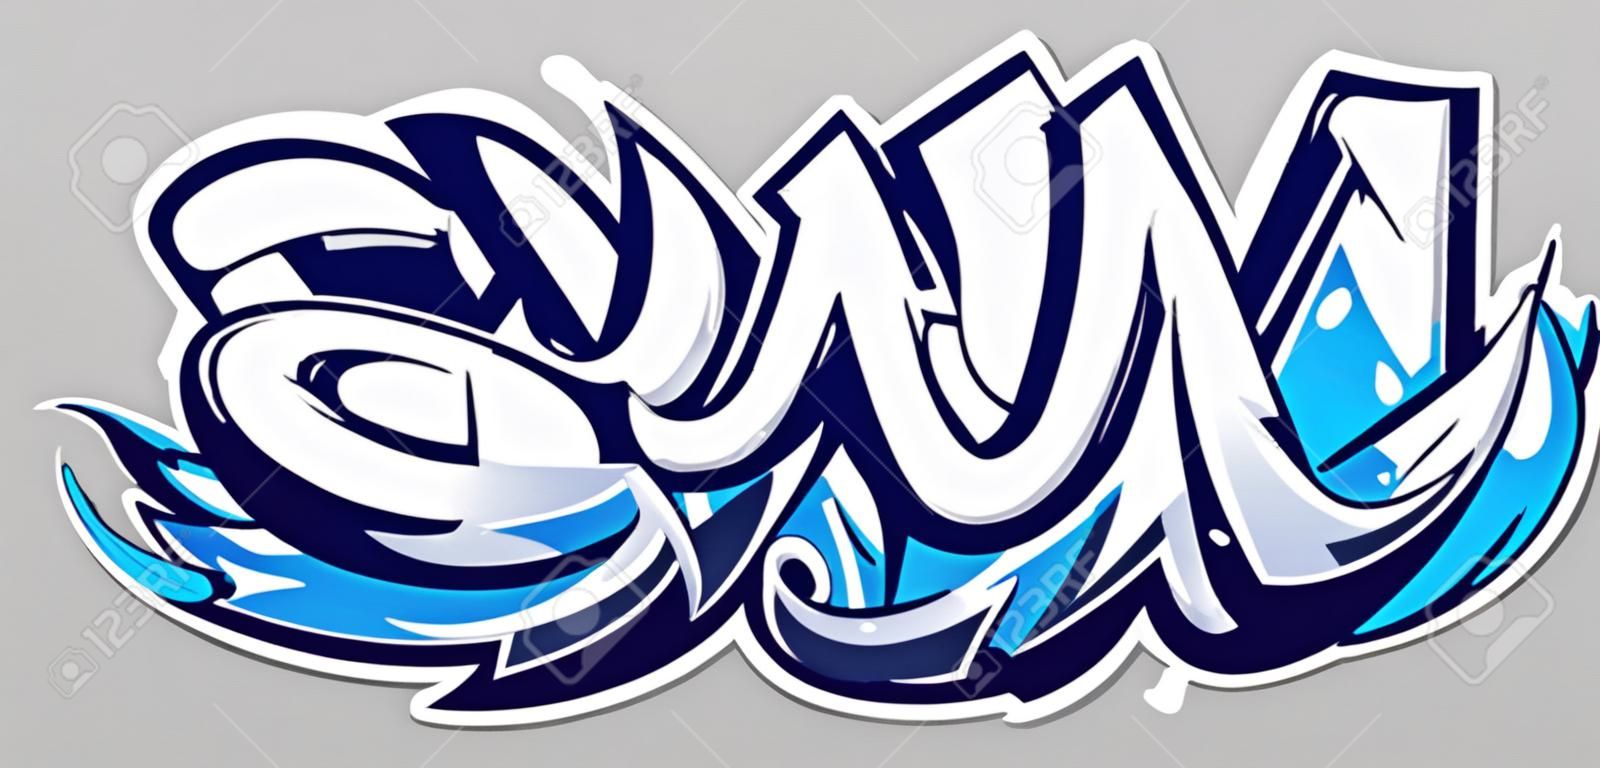 Big Up blue color vector lettering on grey background. Dynamic wild style graffiti art. Three dimensional letters abstract illustration.